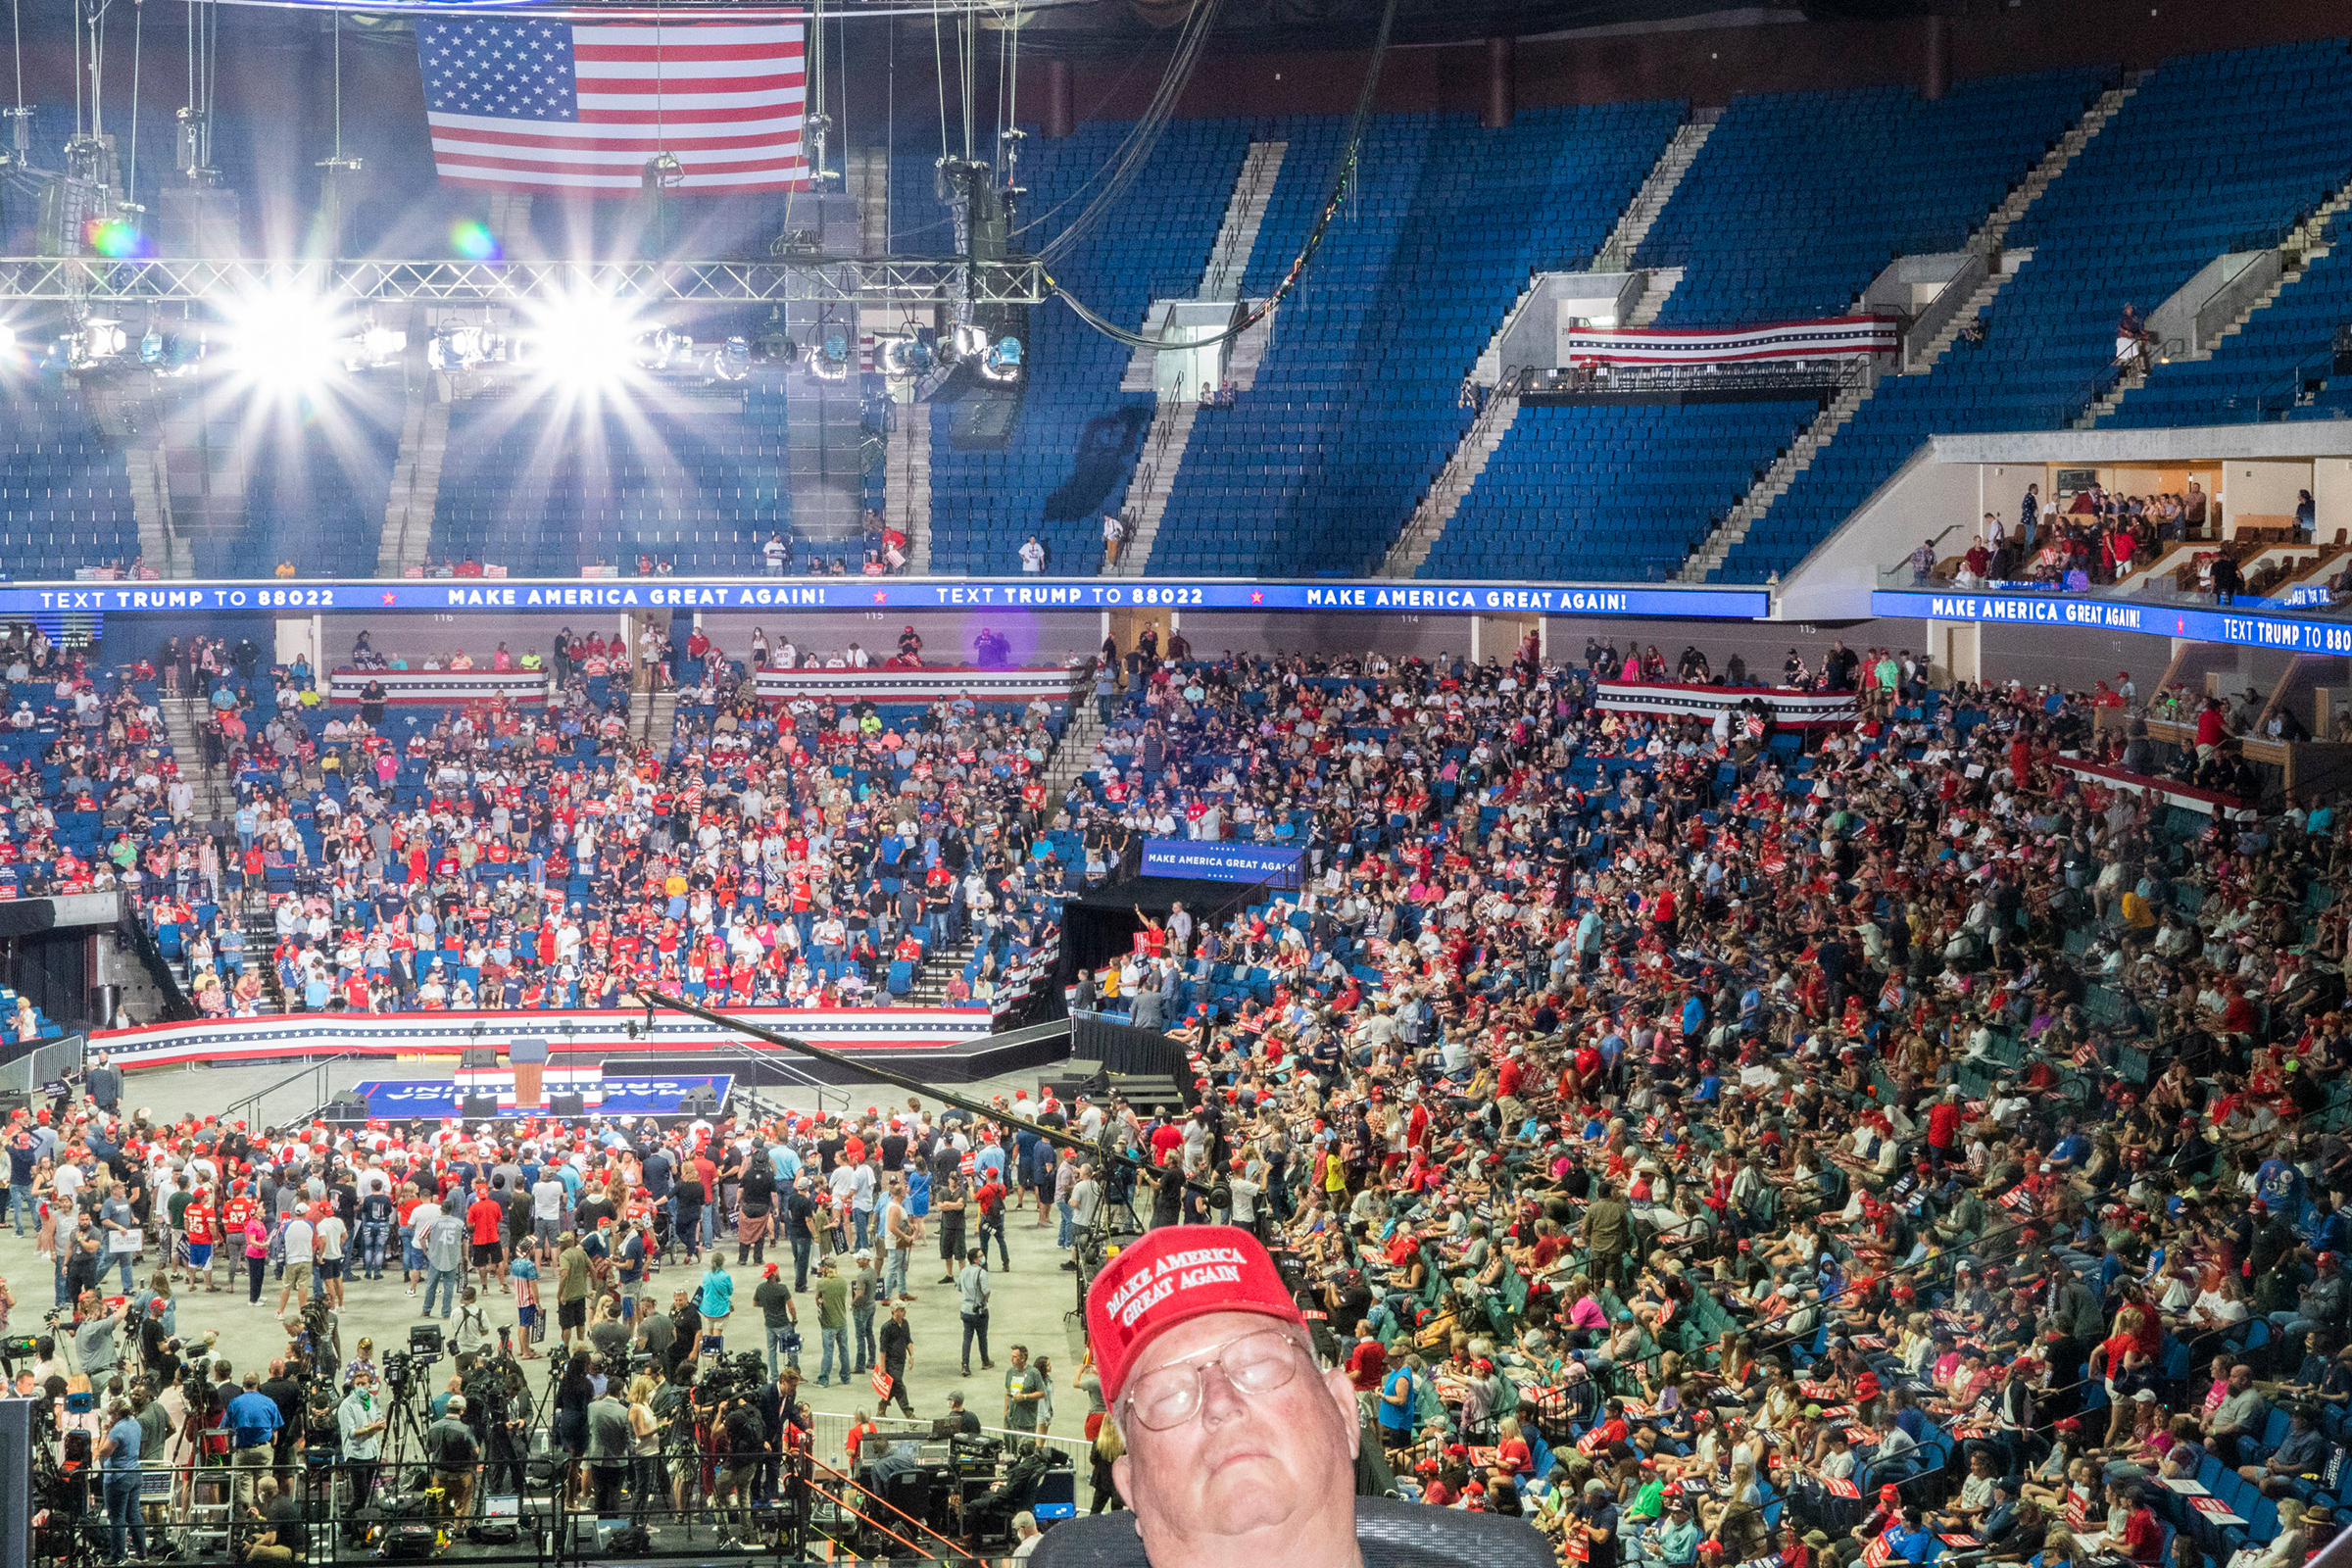 Trump rally attendees wait for the President to arrive at the BOK Center in Tulsa, Oklahoma on June 20, 2020. (Peter van Agtmael—Magnum Photos for TIME)